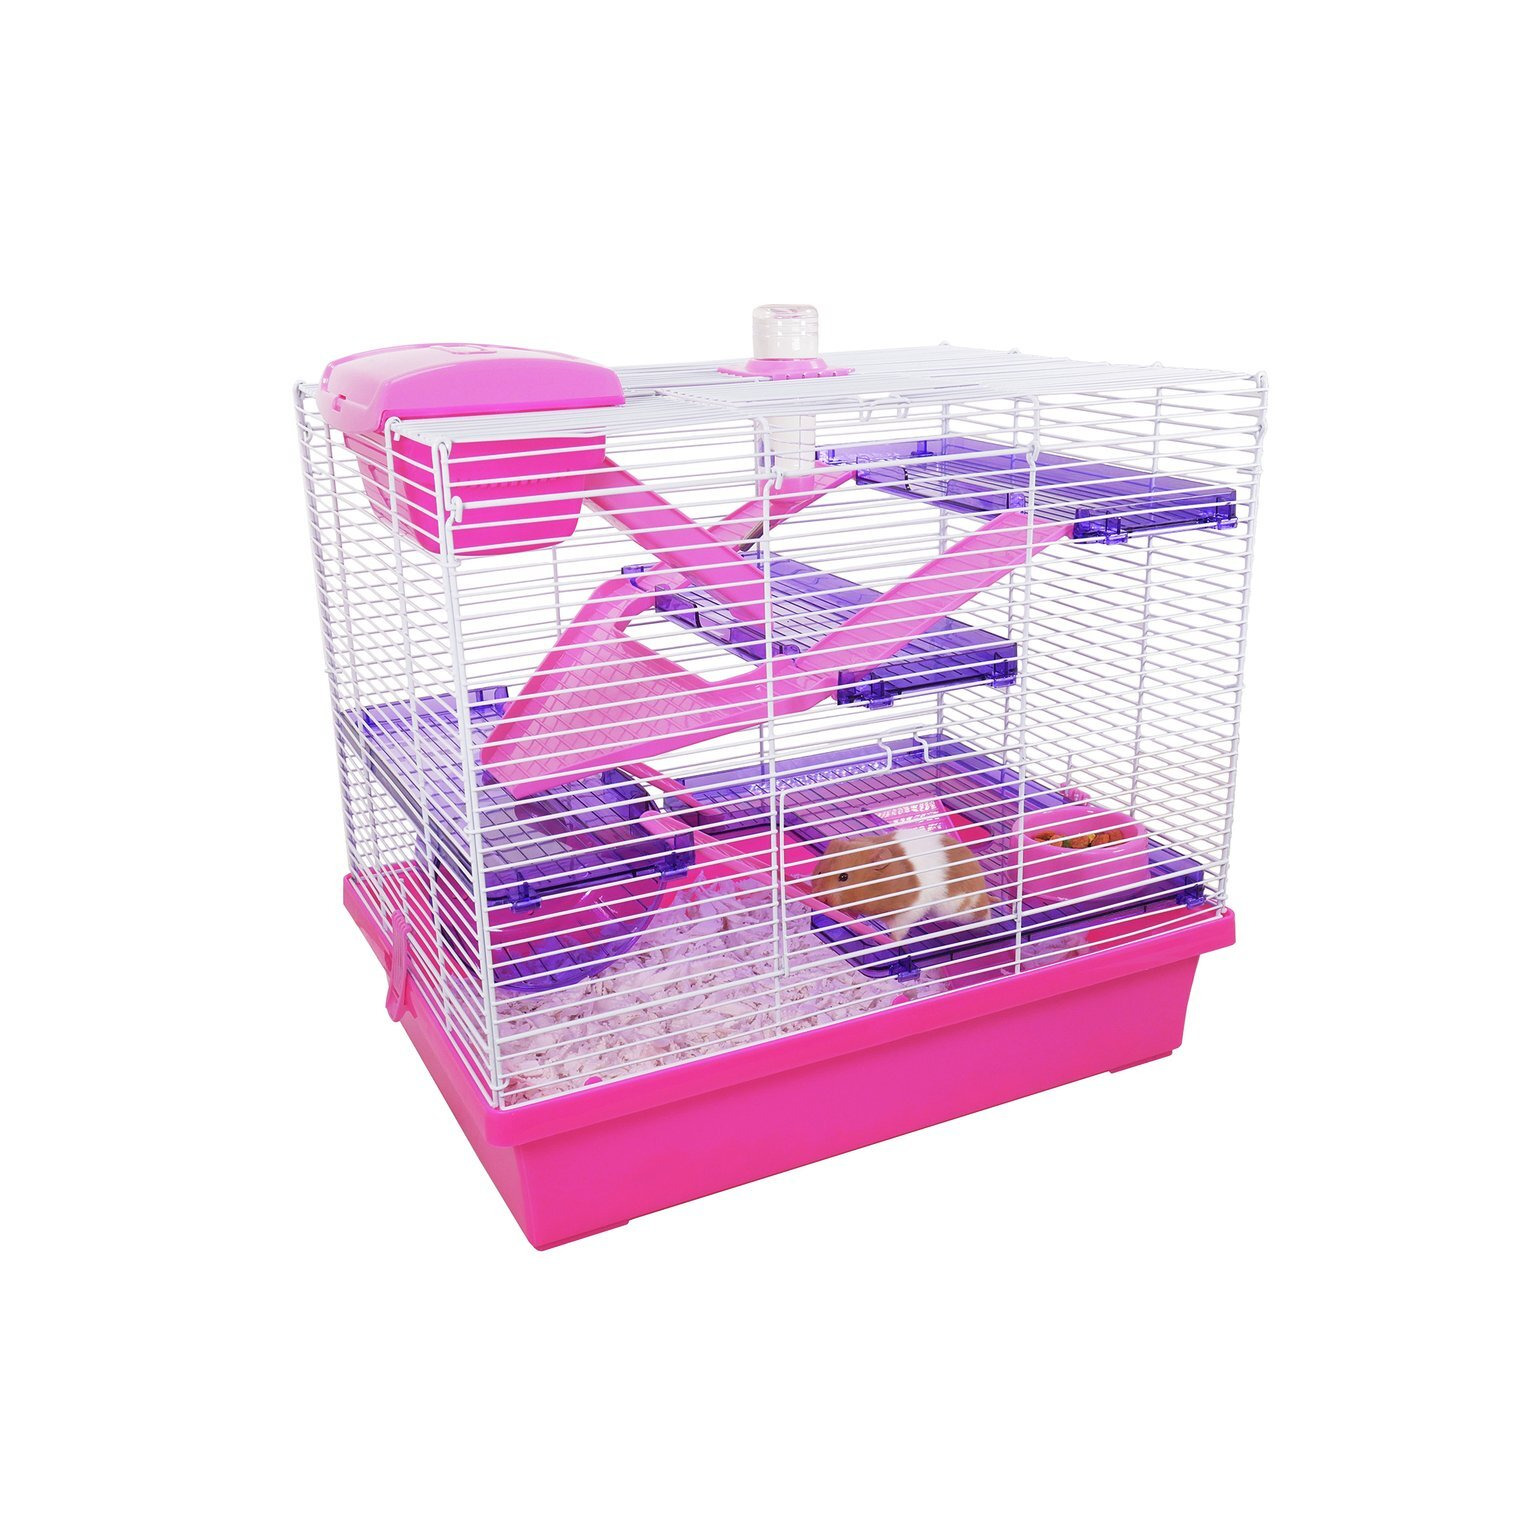 Rosewood Pink/Purple Pico Hamster Cage - X Large - image 1